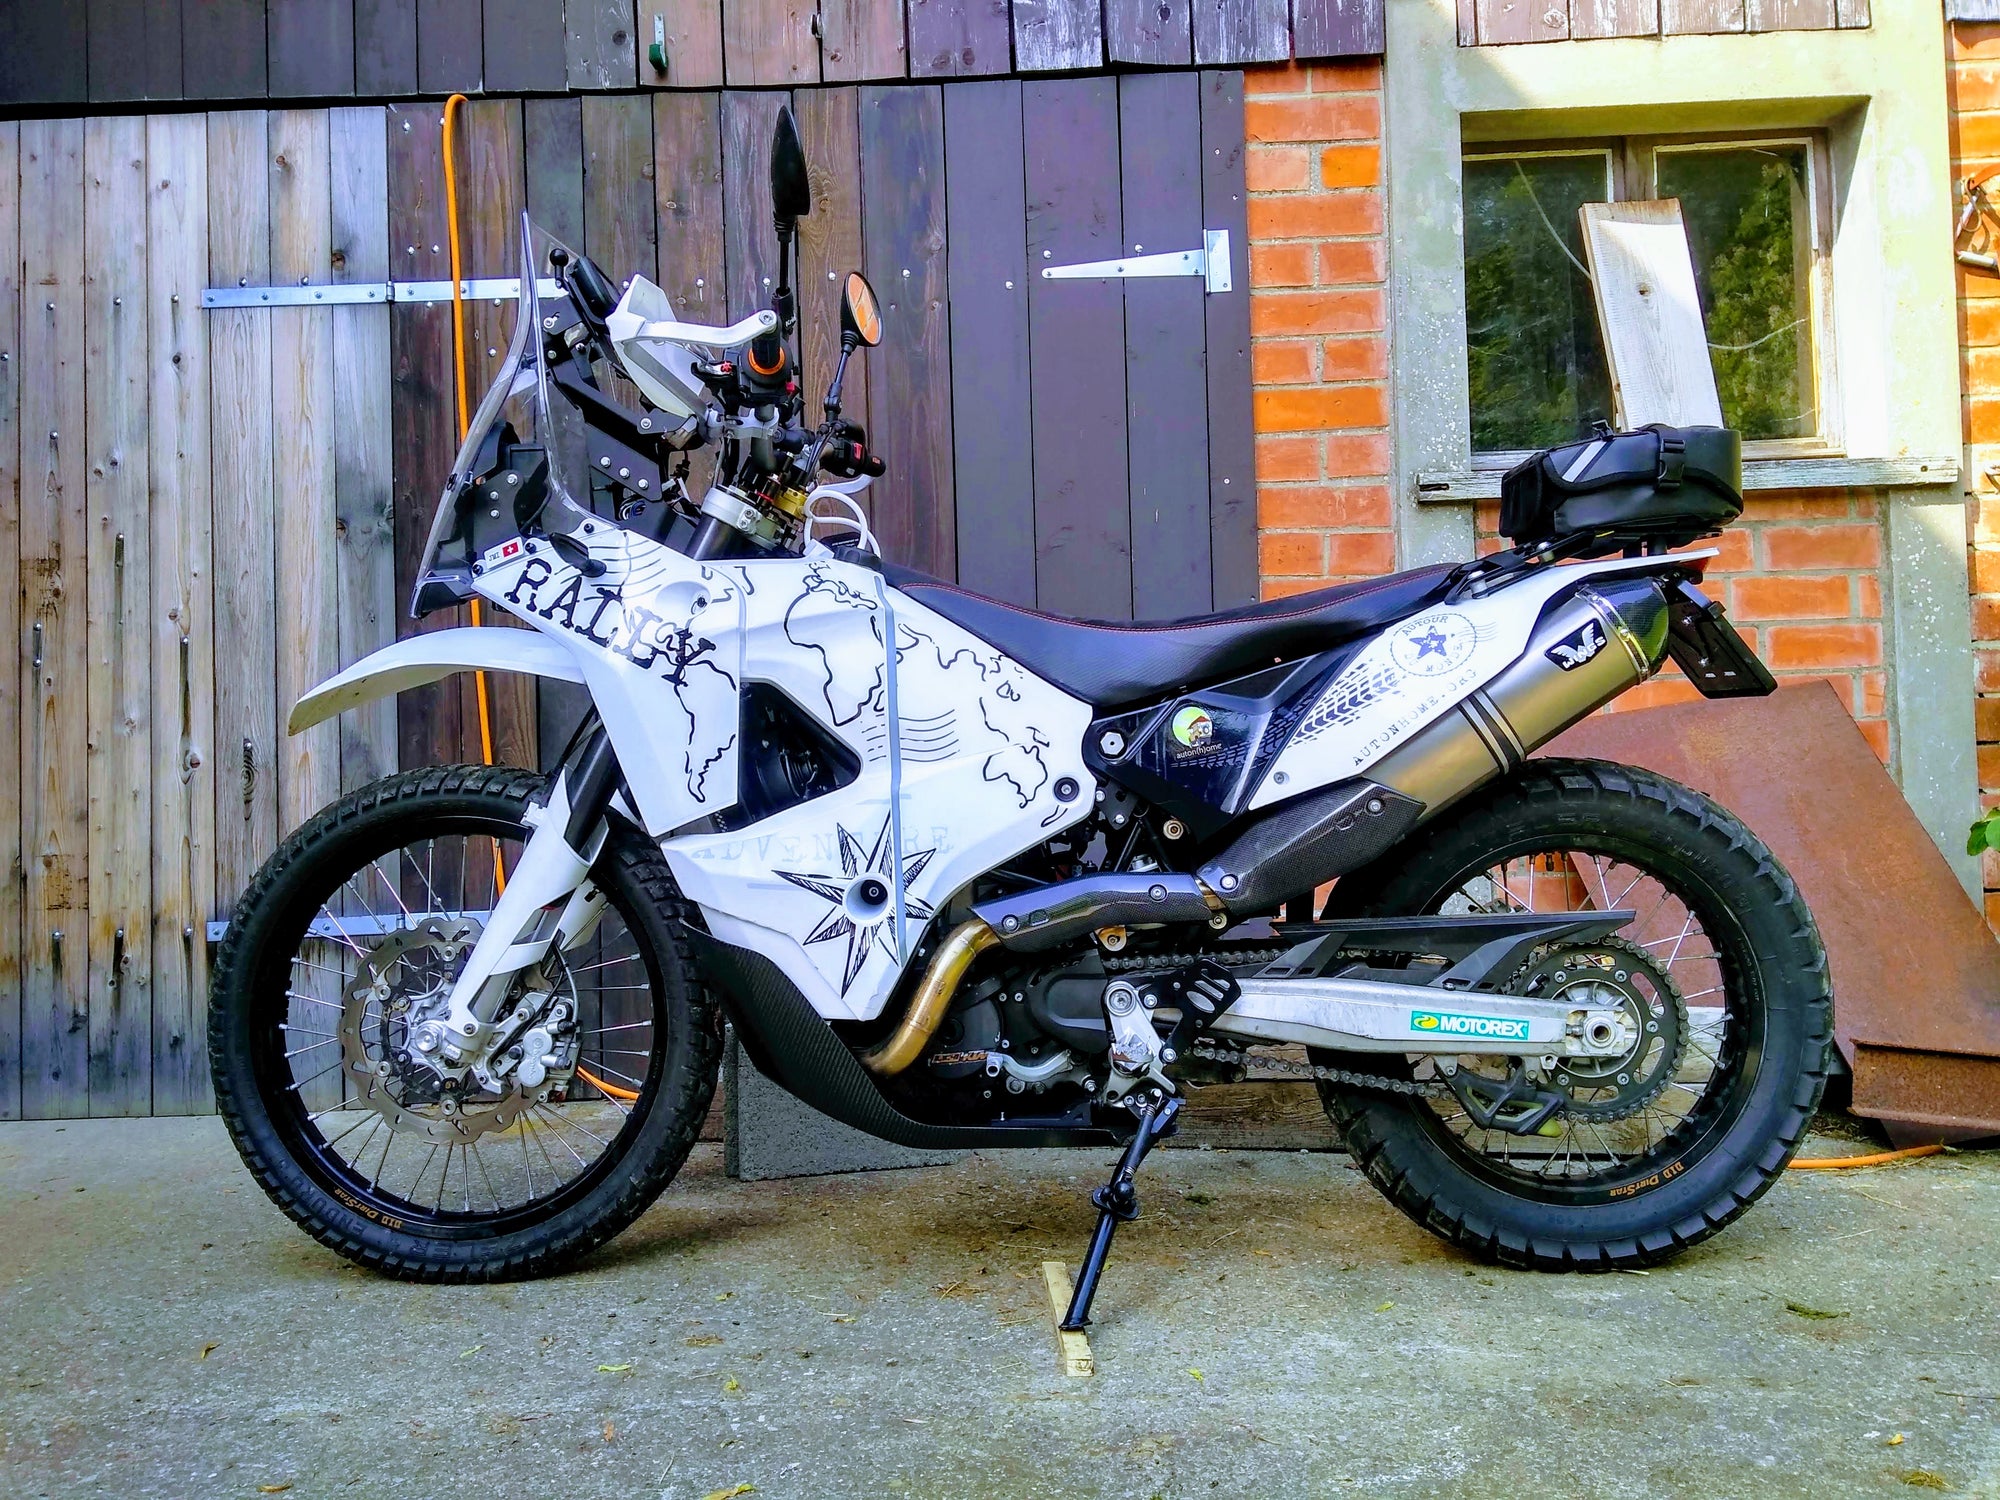 KIT690 bike with Perun moto and Giant Loop combo